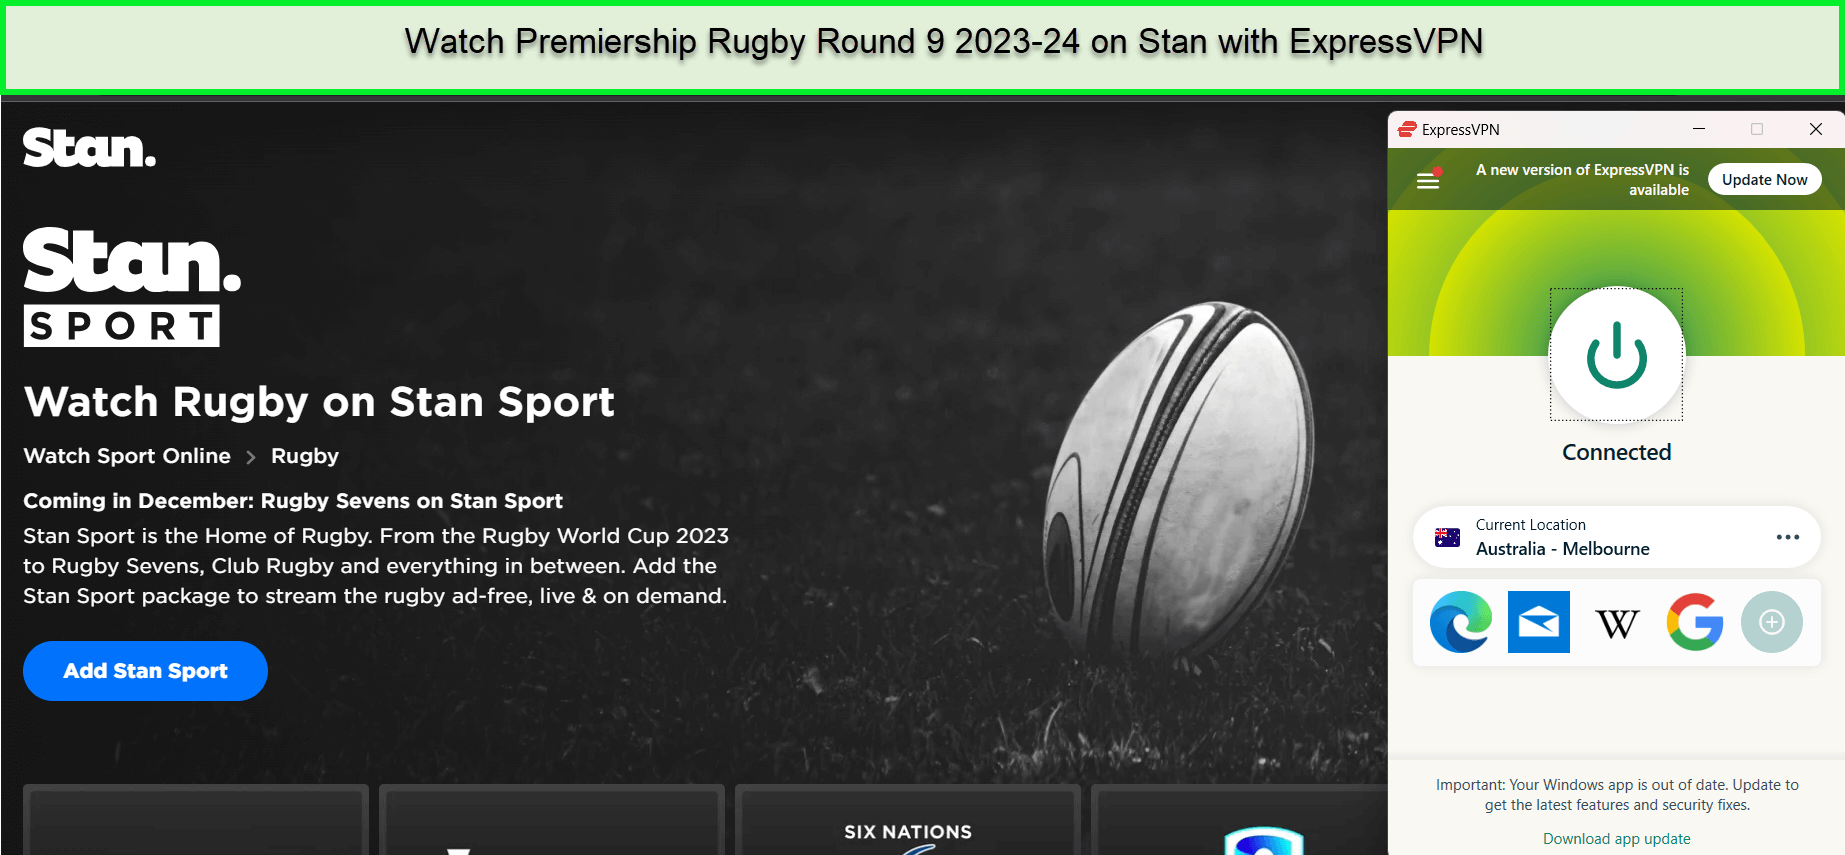 Watch-Premiership-Rugby-Round-9-2023-24-outside-Australia-on-Stan